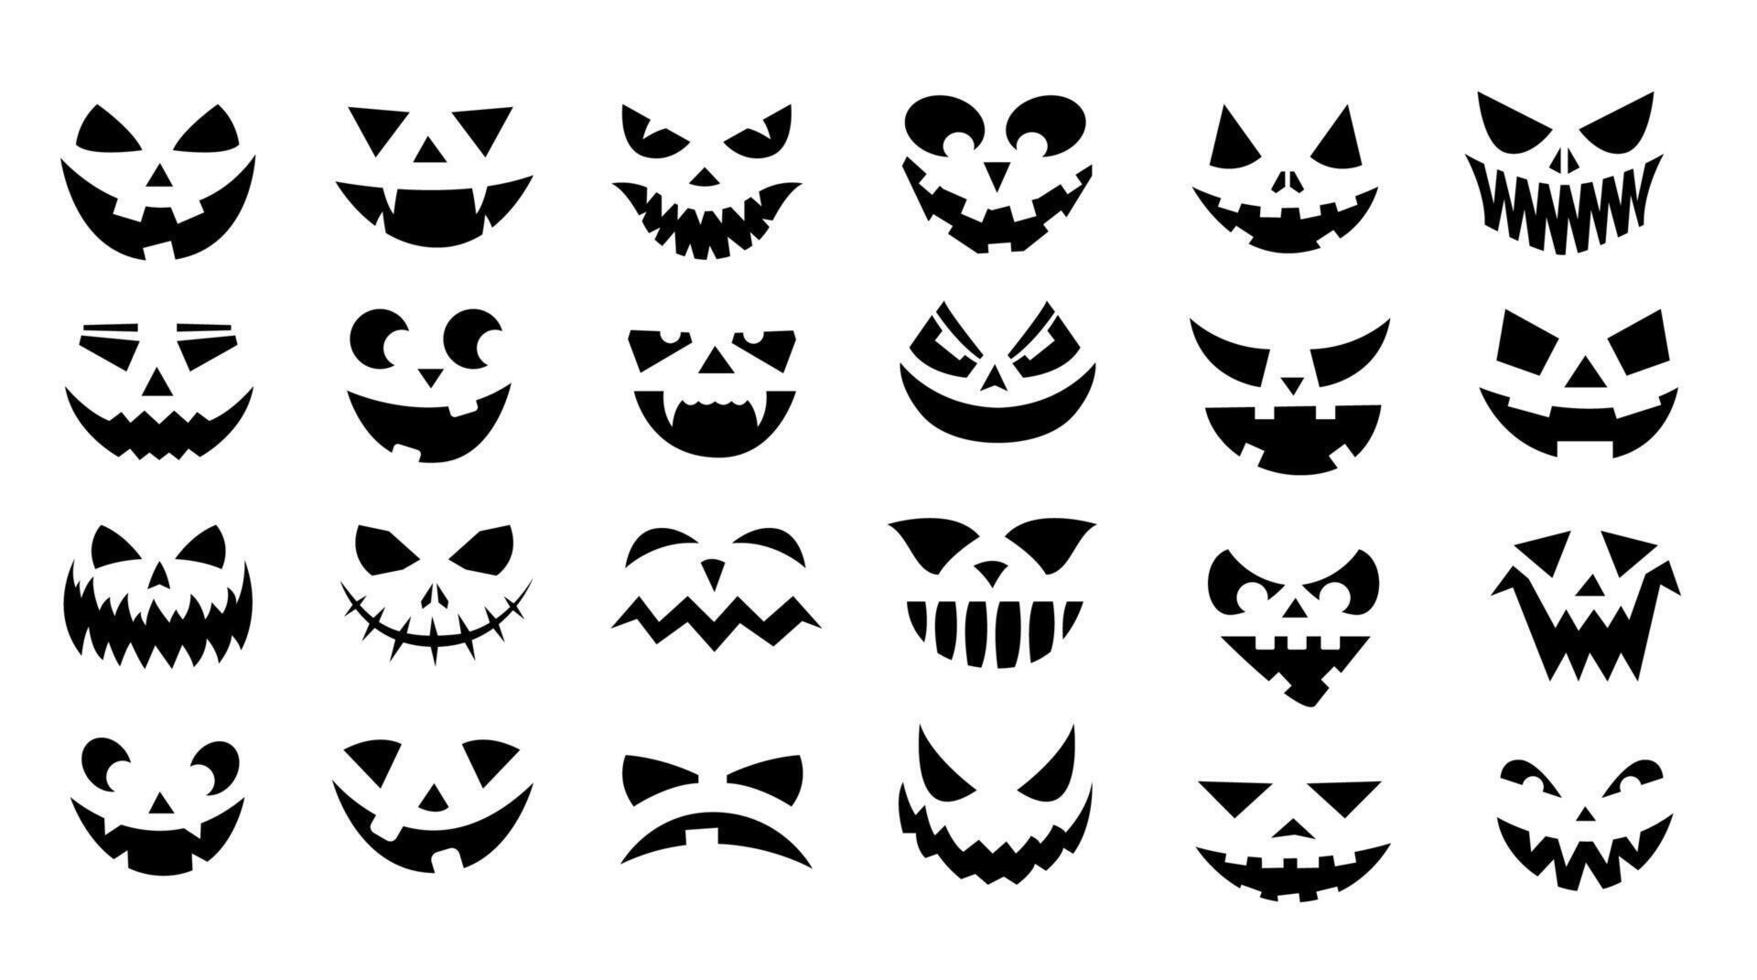 Scary faces. Halloween smiley pumpkin faces, creepy jack lantern with evil ghost expression and angry eyes, horror monster face collection. Vector isolated set